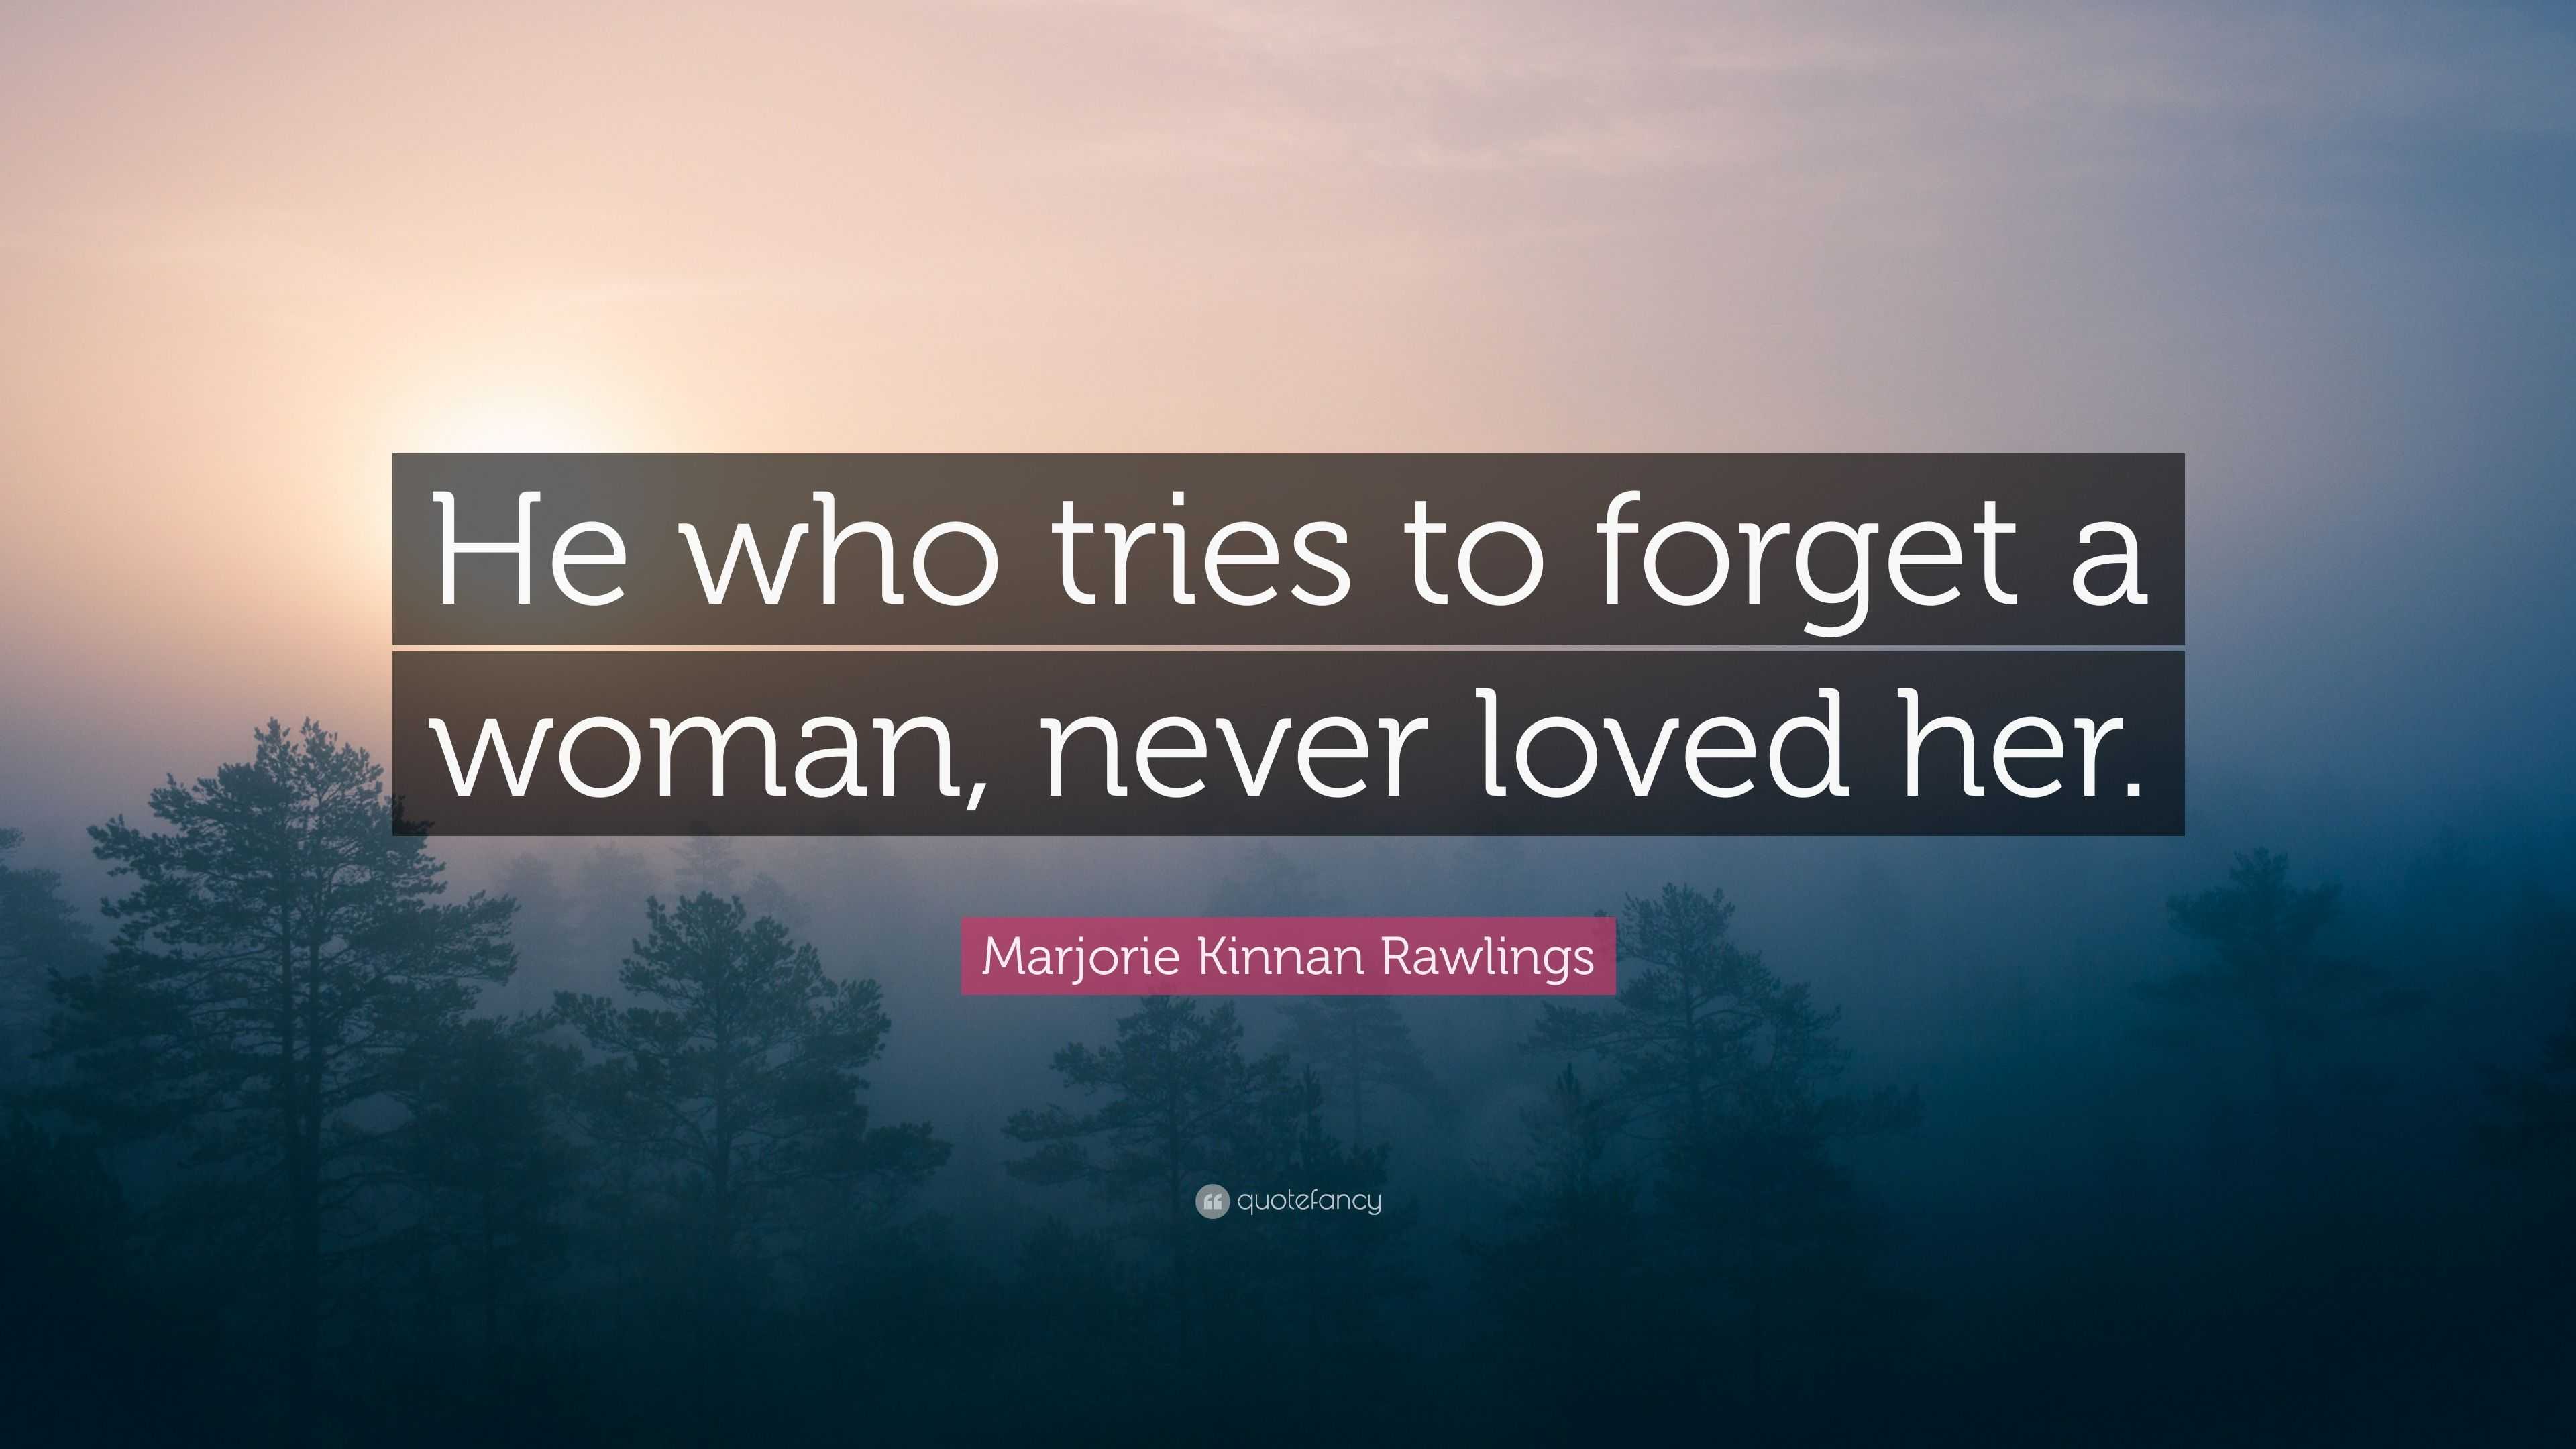 Marjorie Kinnan Rawlings Quote: “He who tries to forget a woman, never ...